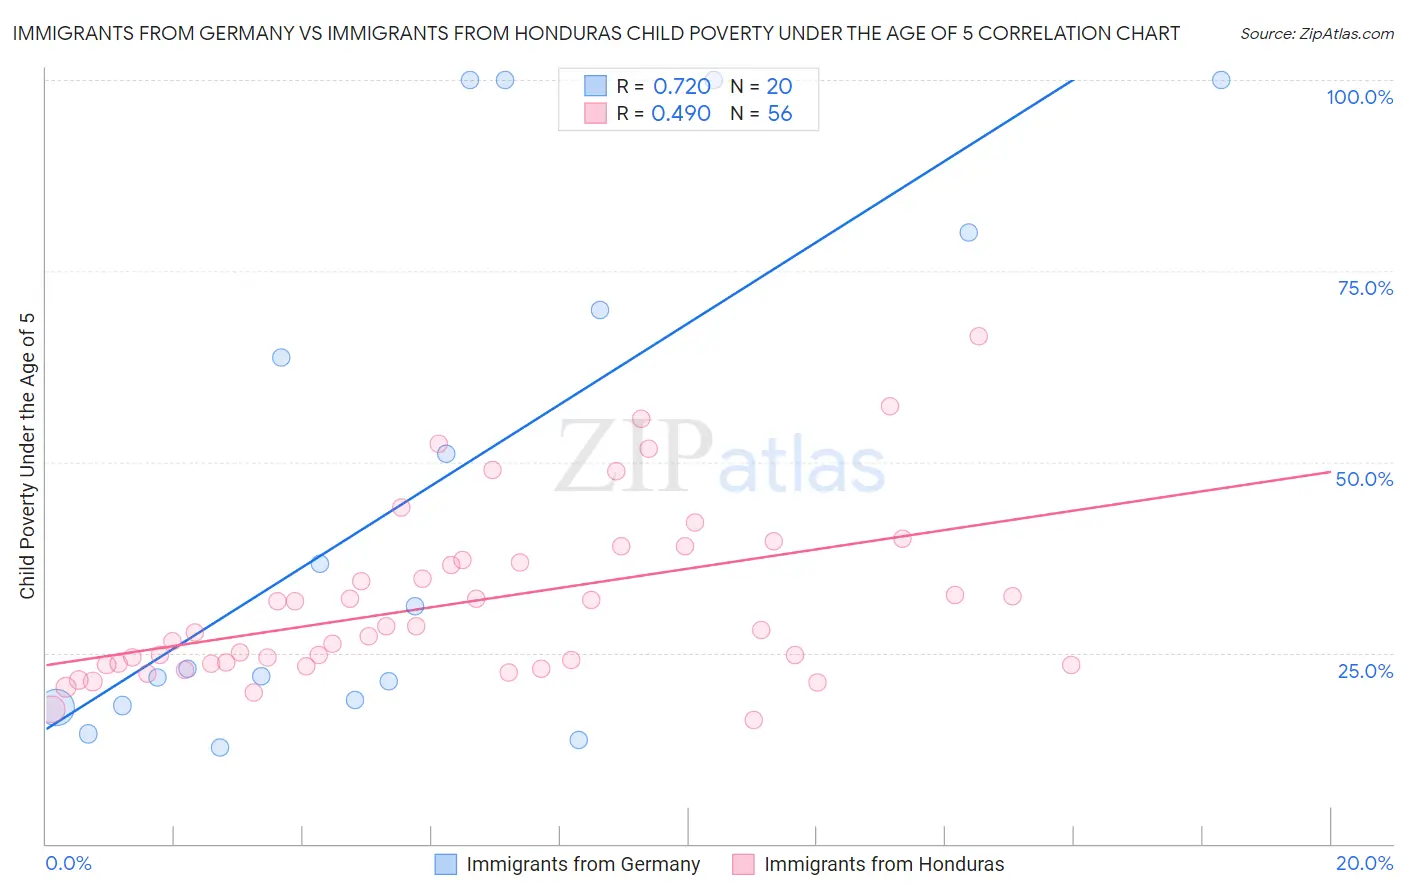 Immigrants from Germany vs Immigrants from Honduras Child Poverty Under the Age of 5